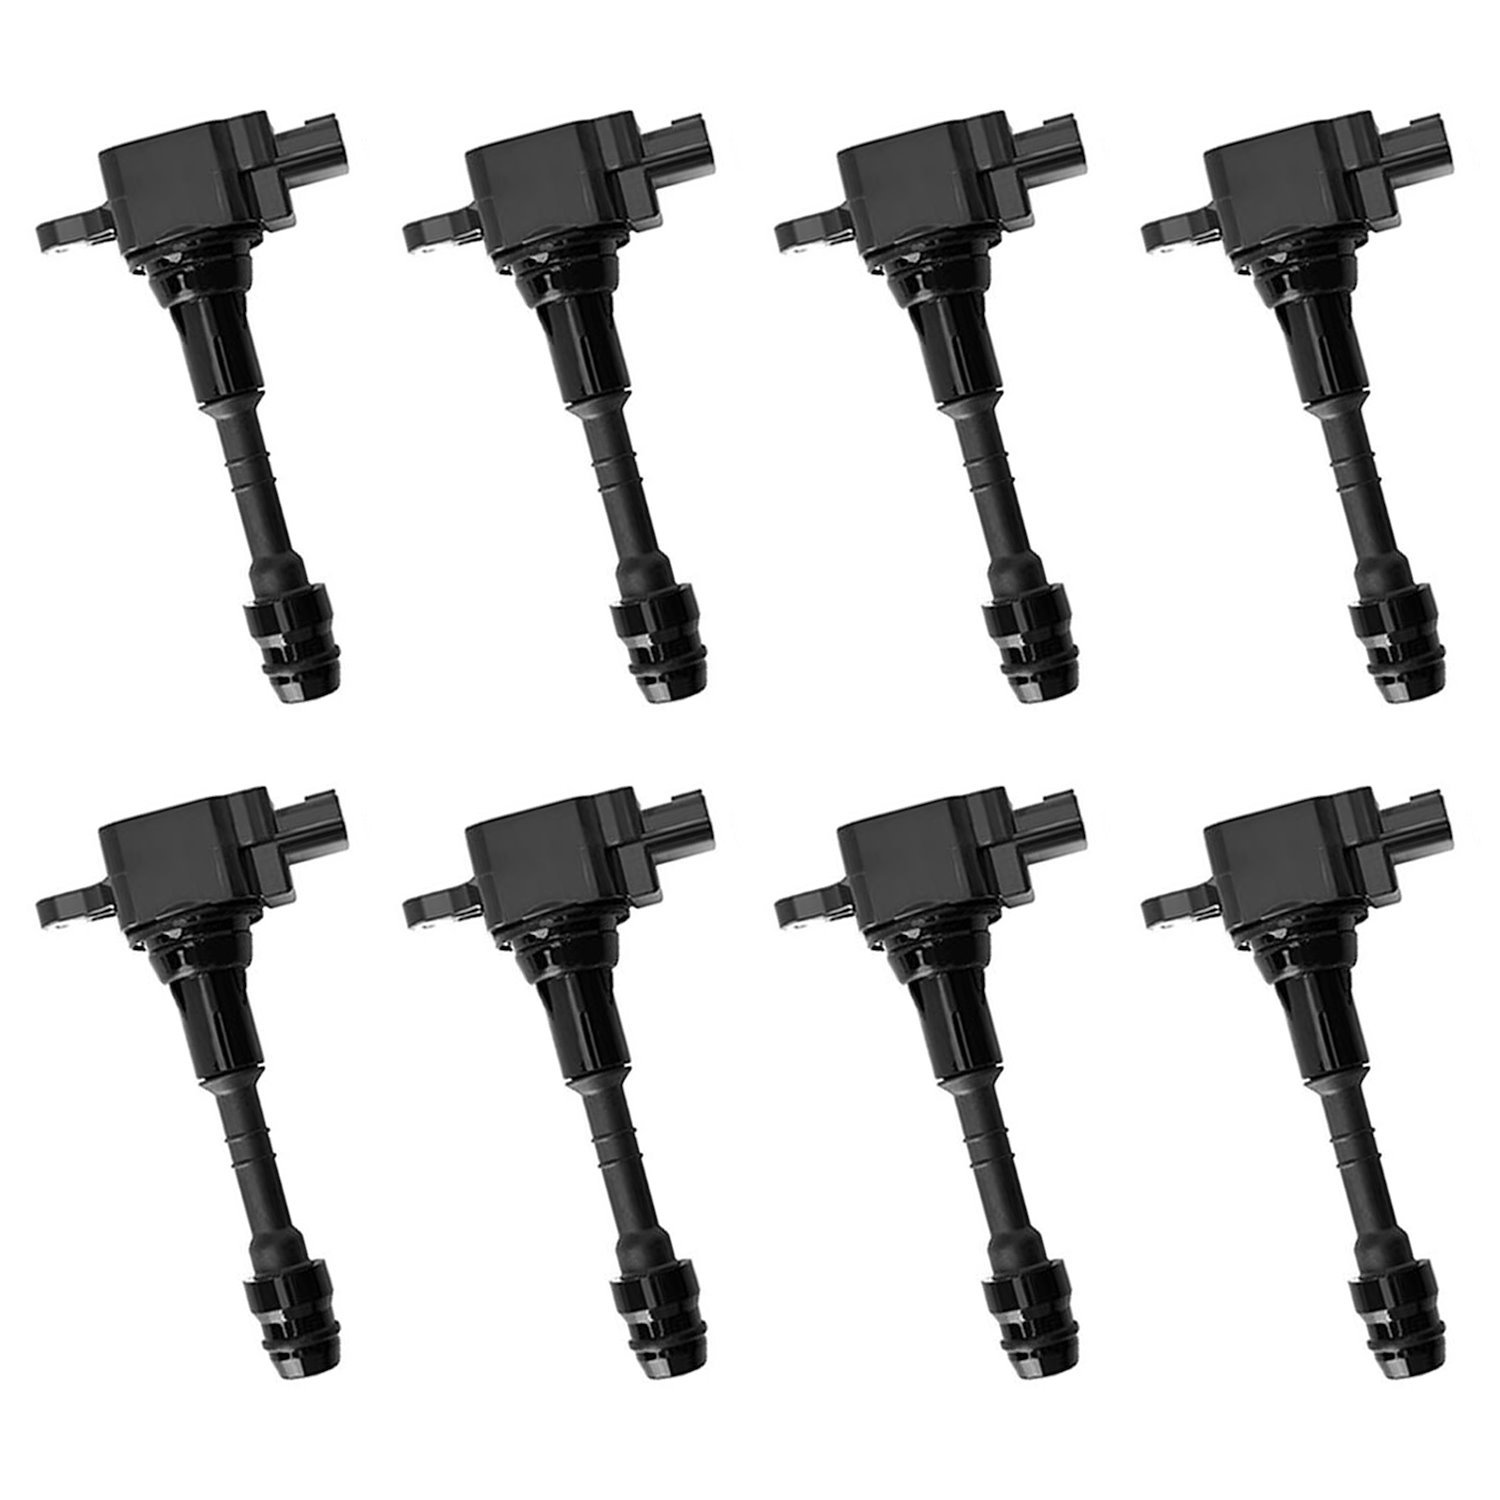 OE Replacement Ignition Coils for 2004-2007 Nissan Titan